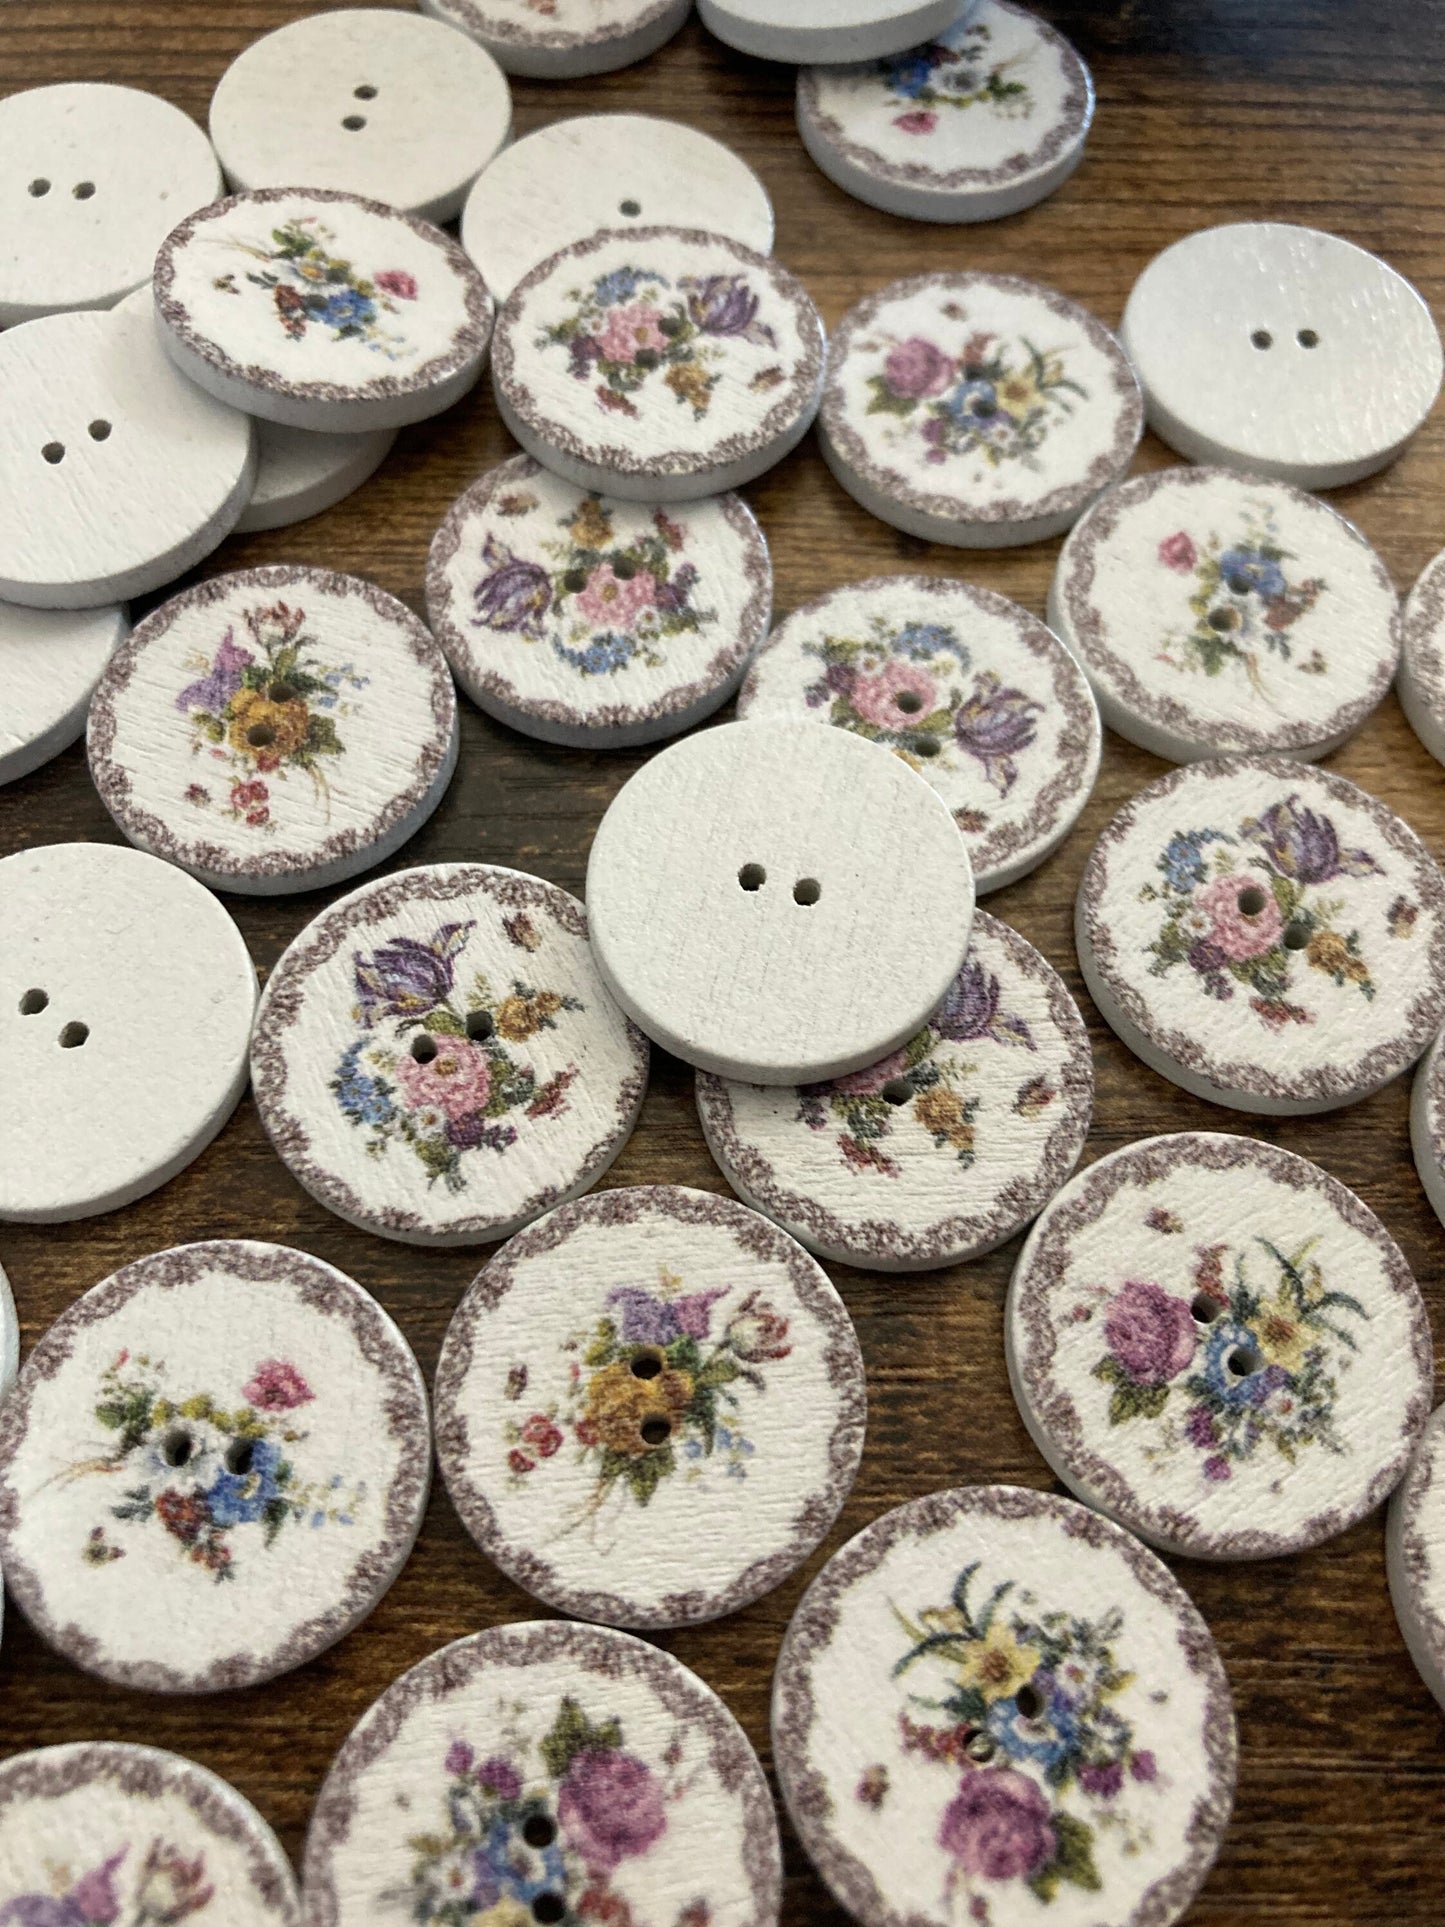 Set of 50 x 20mm round beige uk pretty vintage floral pink roses wooden buttons